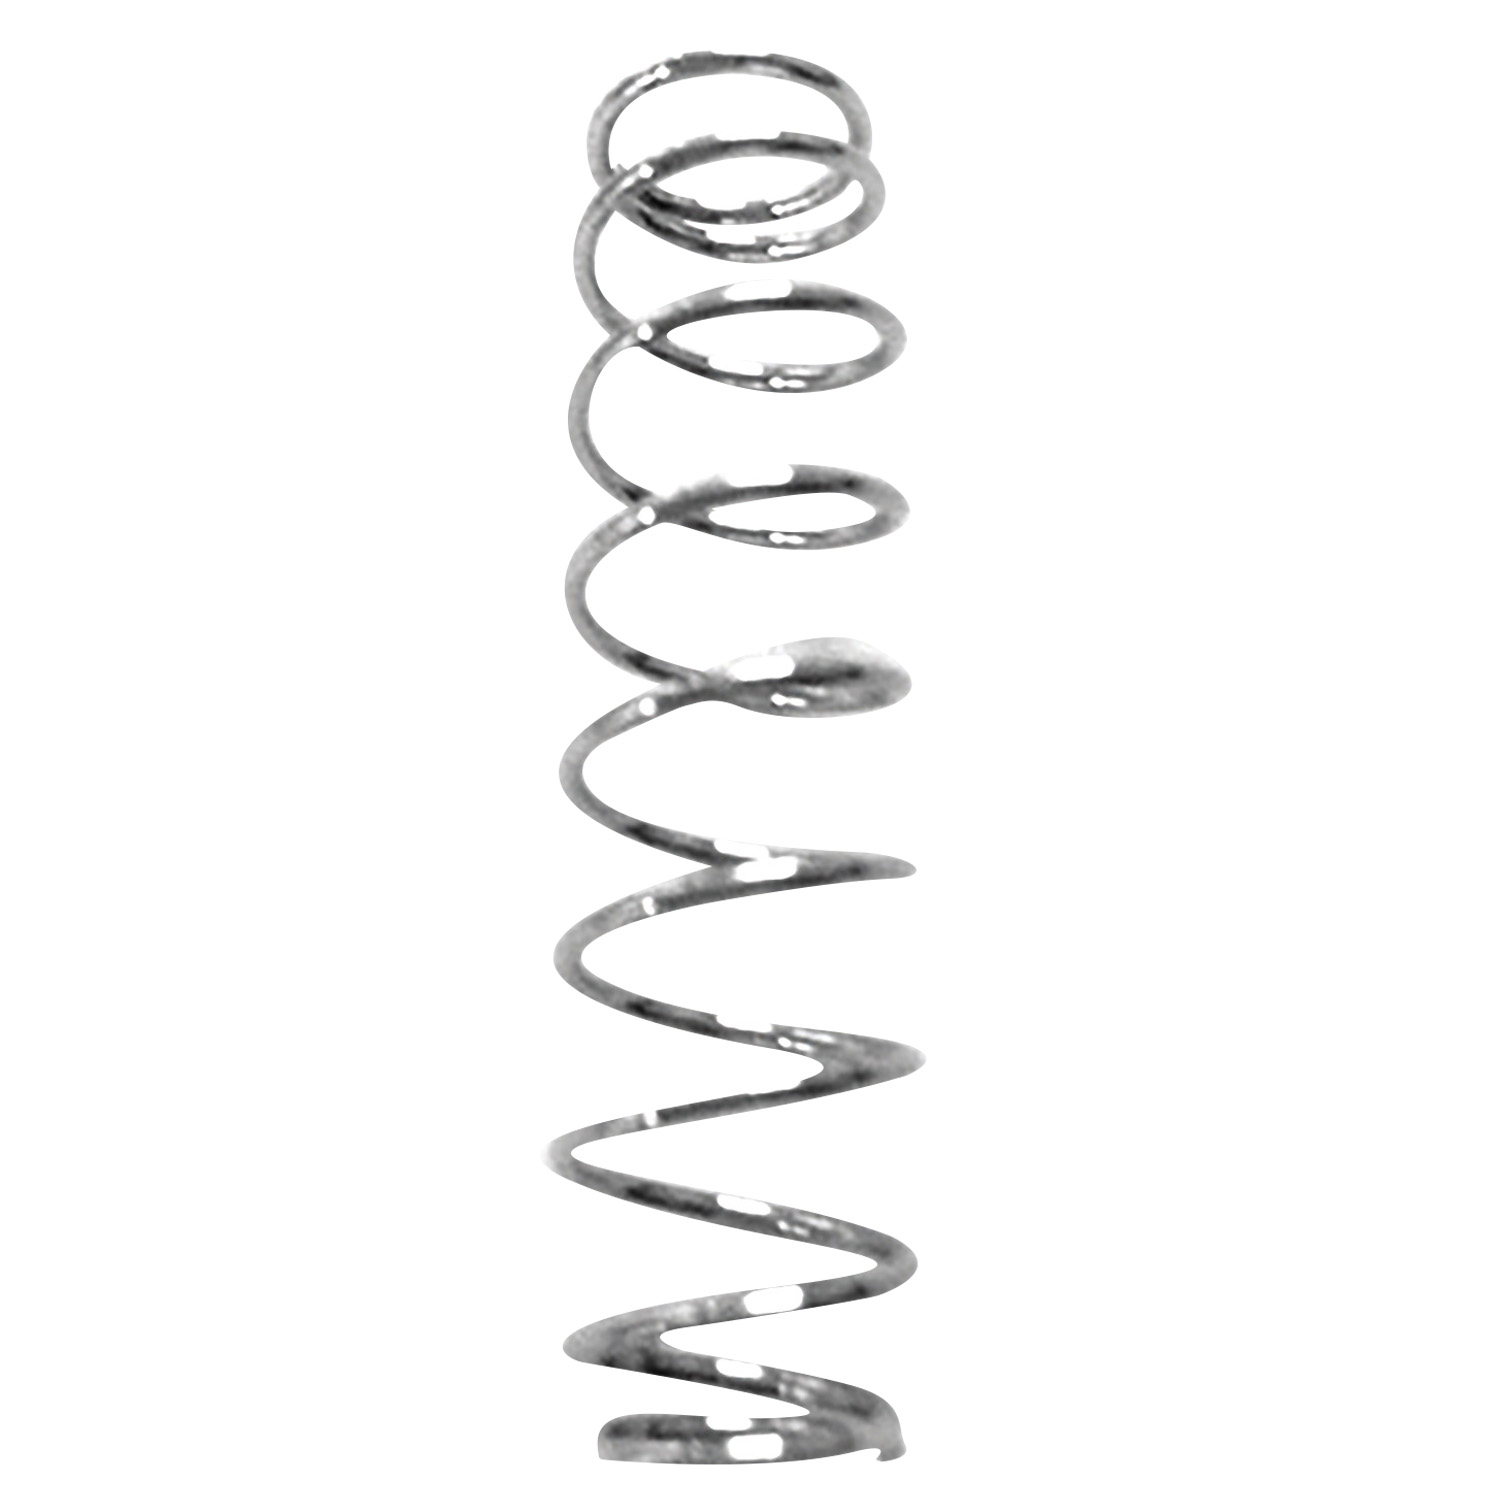 BURGON & BALL FOOTROT SHEARS SPARE COIL SPRING